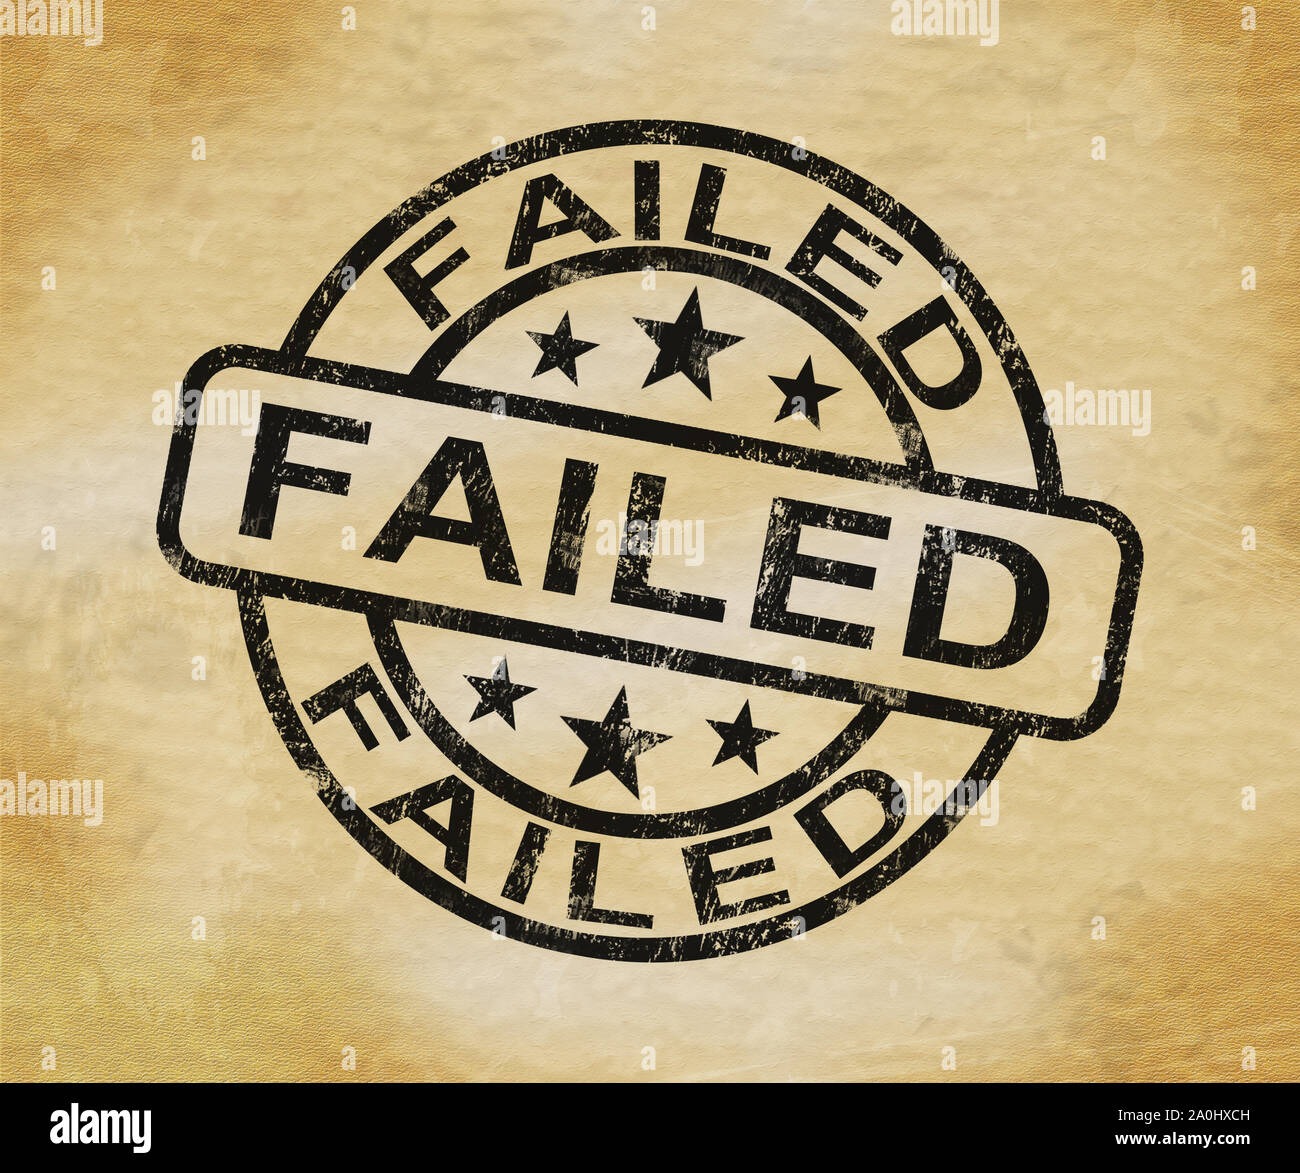 Failed stamp shows failure of system or service. A bad ordeal causing trouble and bad news - 3d illustration Stock Photo